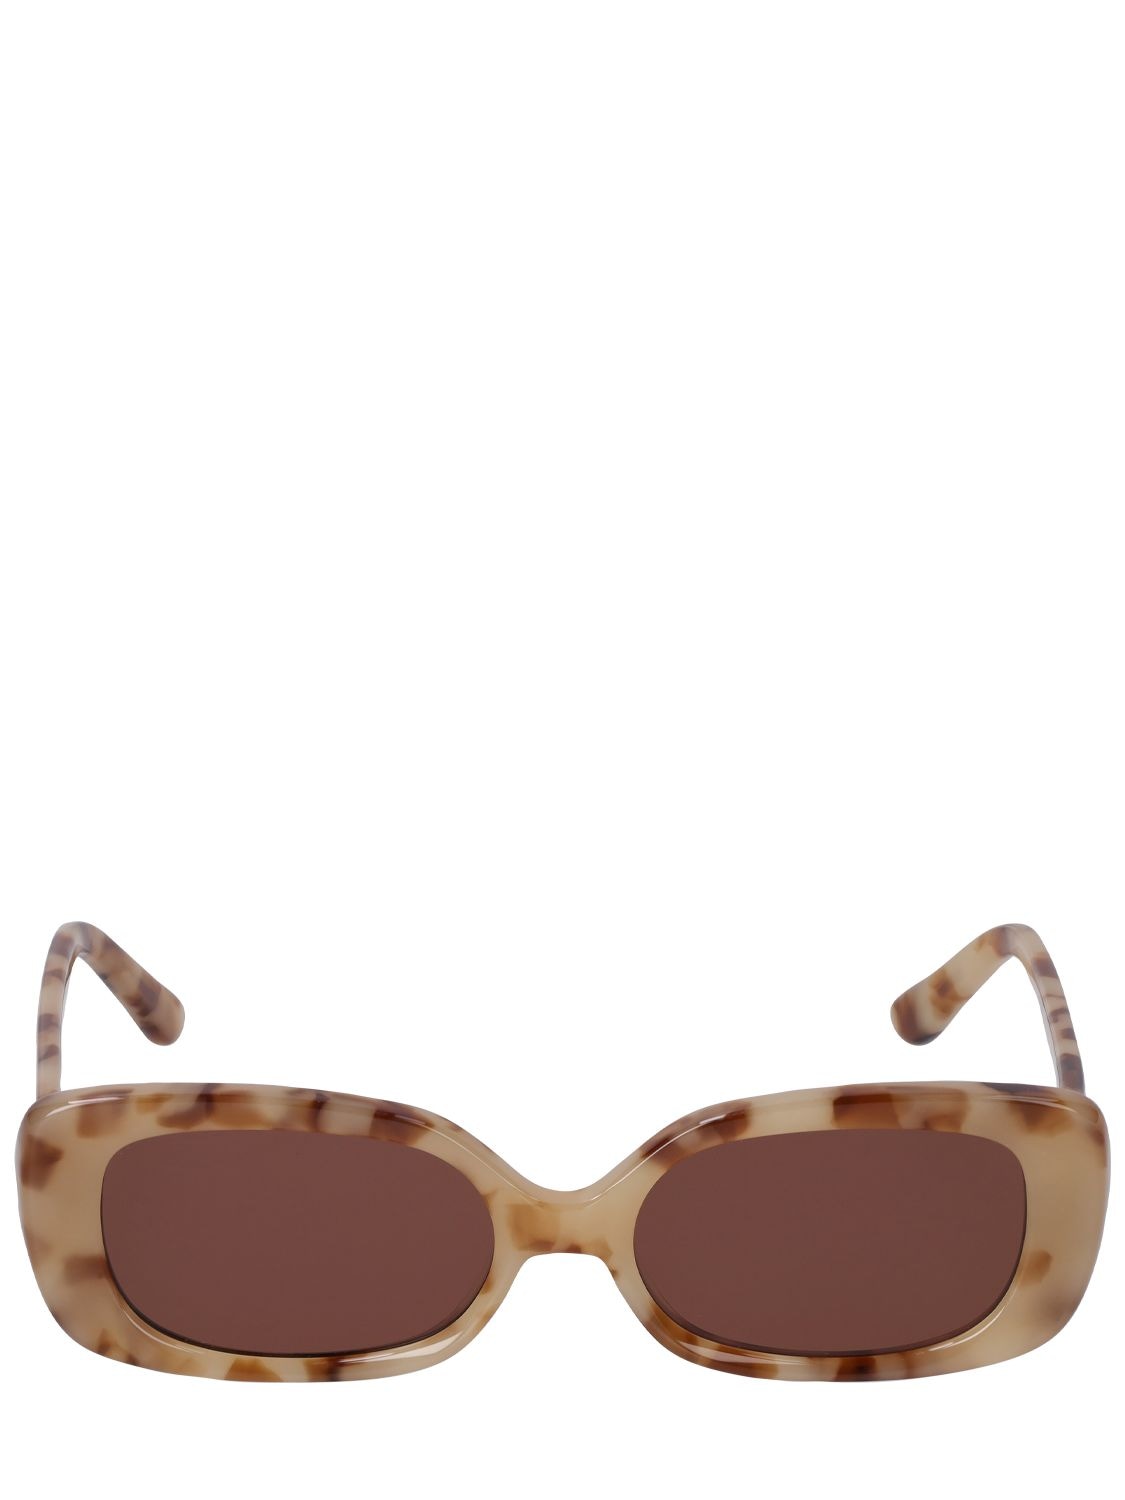 Shop Velvet Canyon Zou Bisou Squared Acetate Sunglasses In Camel,brown